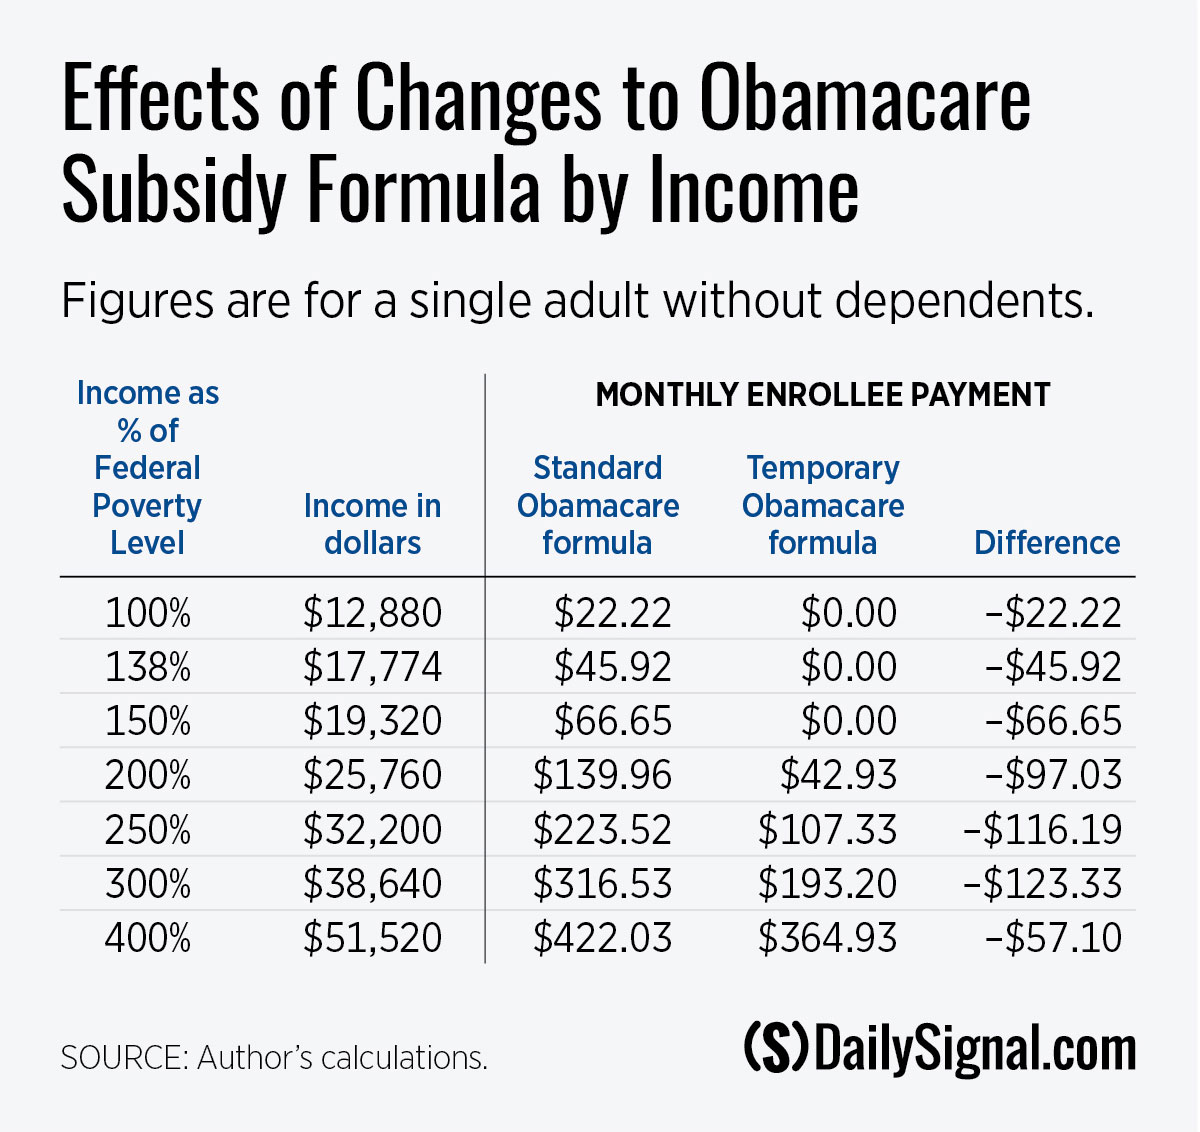 extending-enhanced-obamacare-subsidies-would-be-costly-ineffective